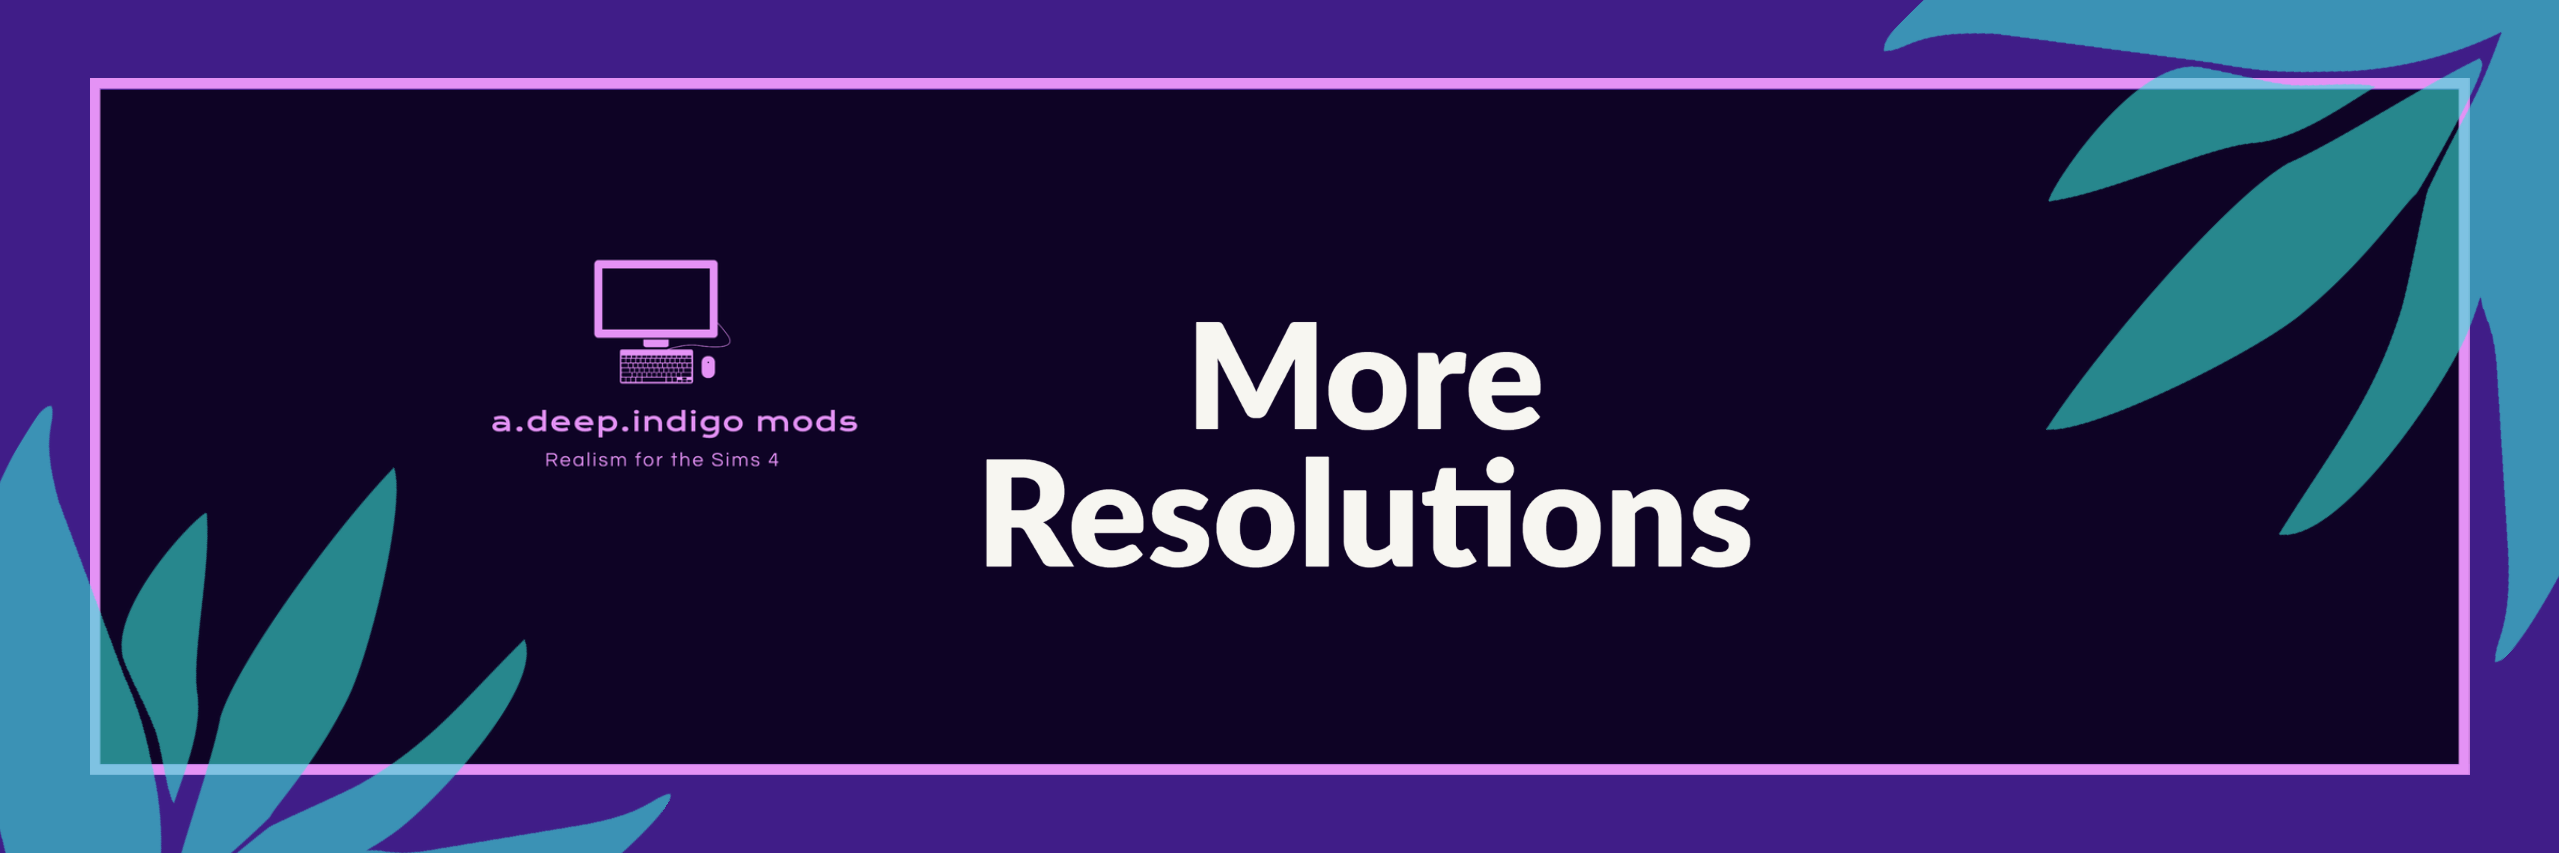 More Resolutions